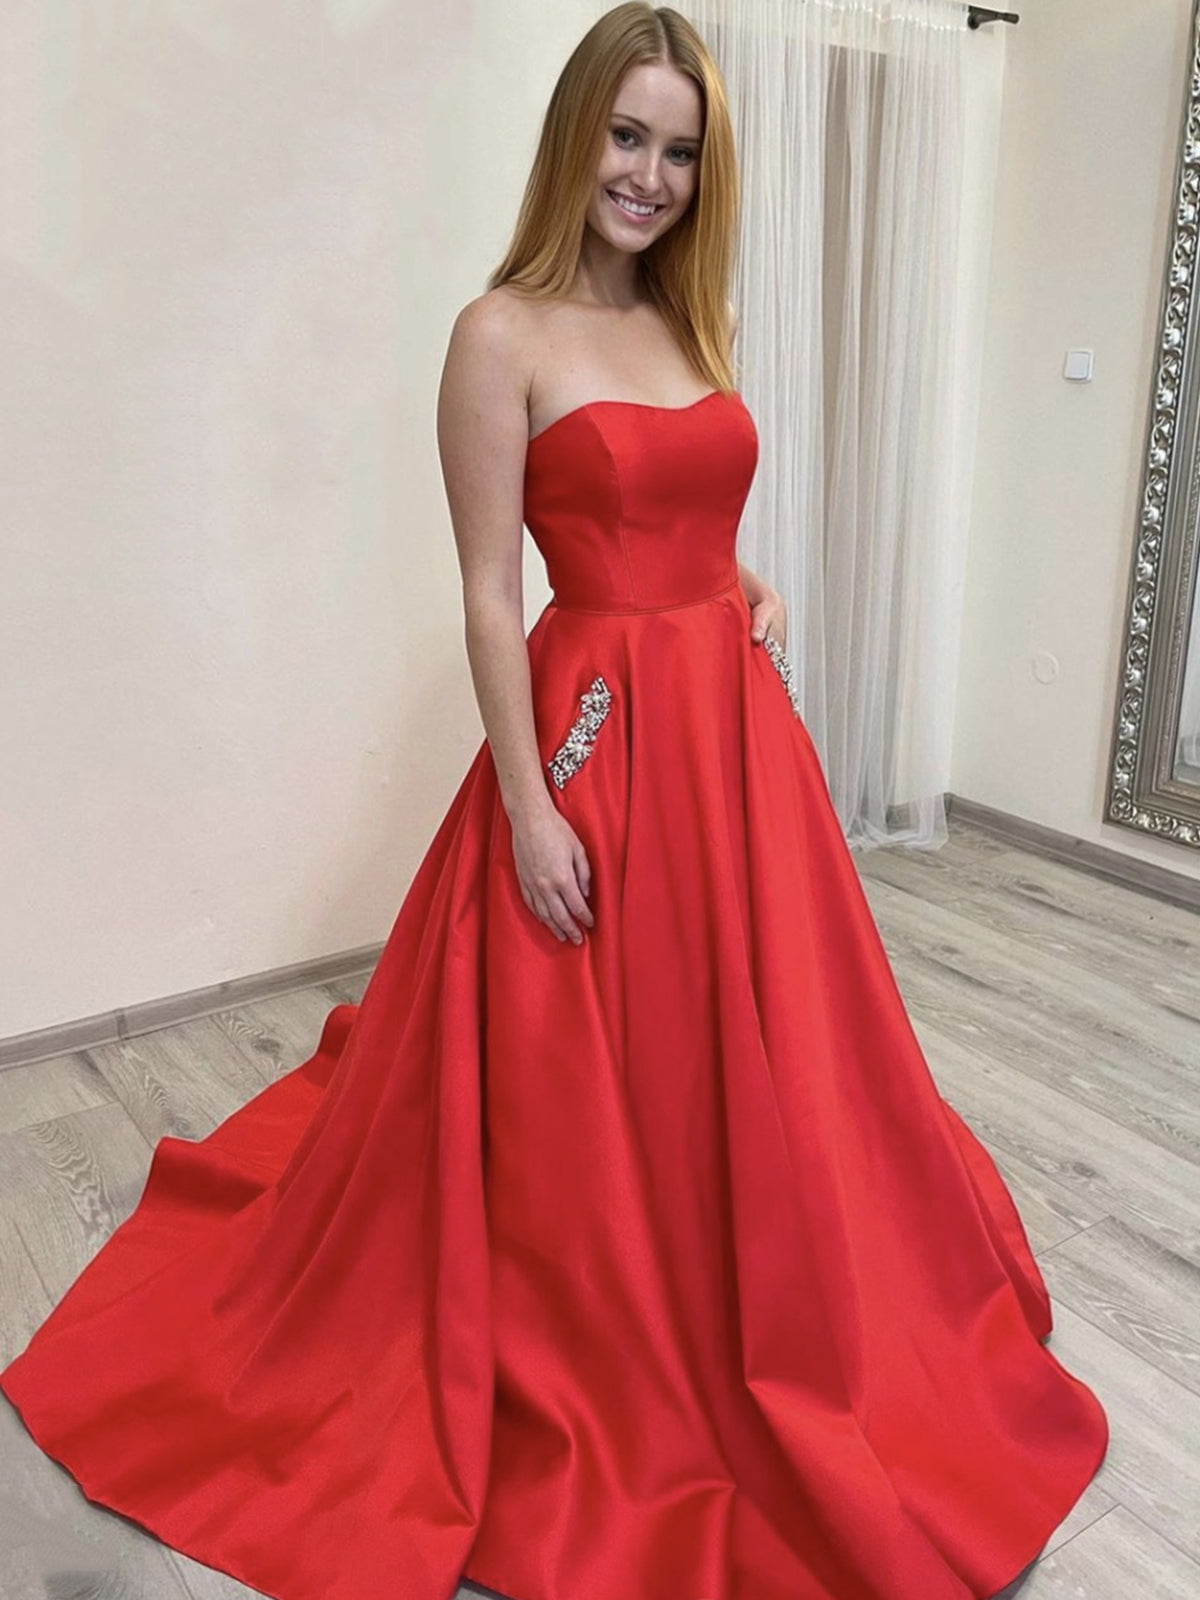 Long A-line Strapless Satin Prom Dress Red Formal Graduation Evening Dresses with Pockets-BIZTUNNEL